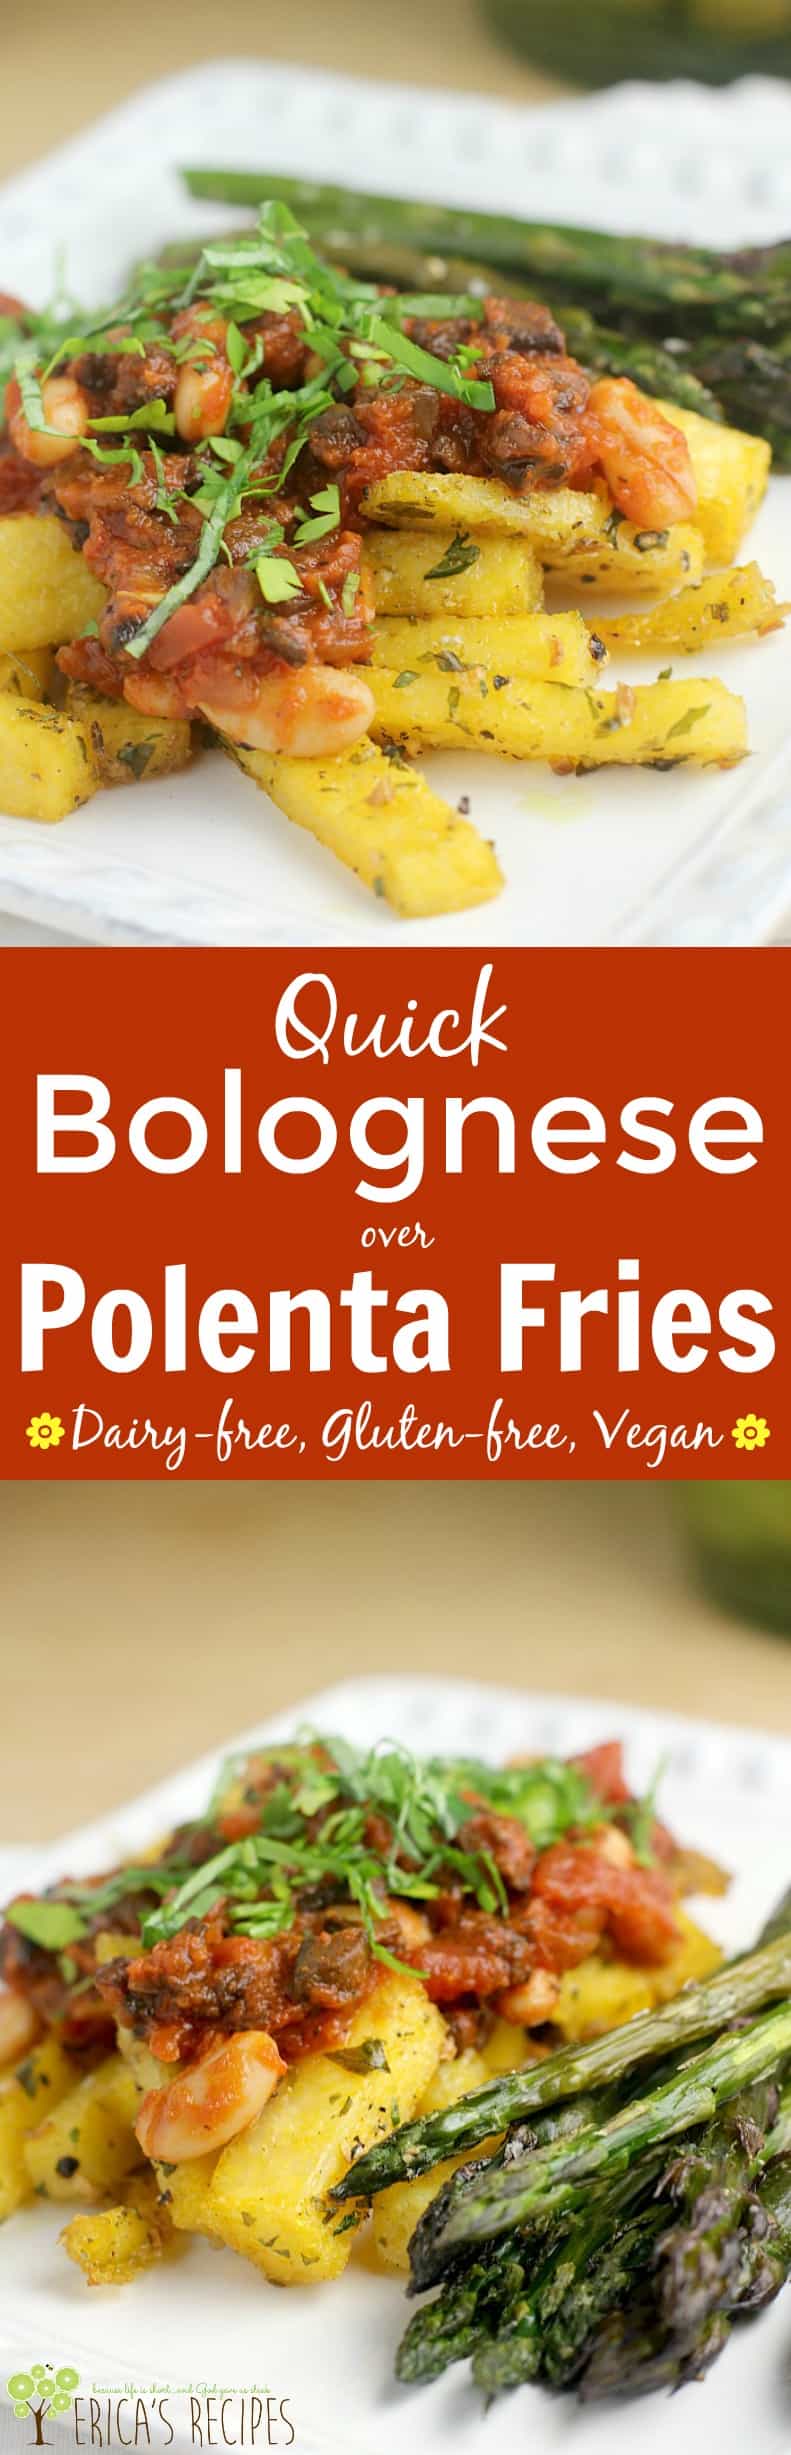 Quick Bolognese over Polenta Fries http://wp.me/p4qC4h-3yS